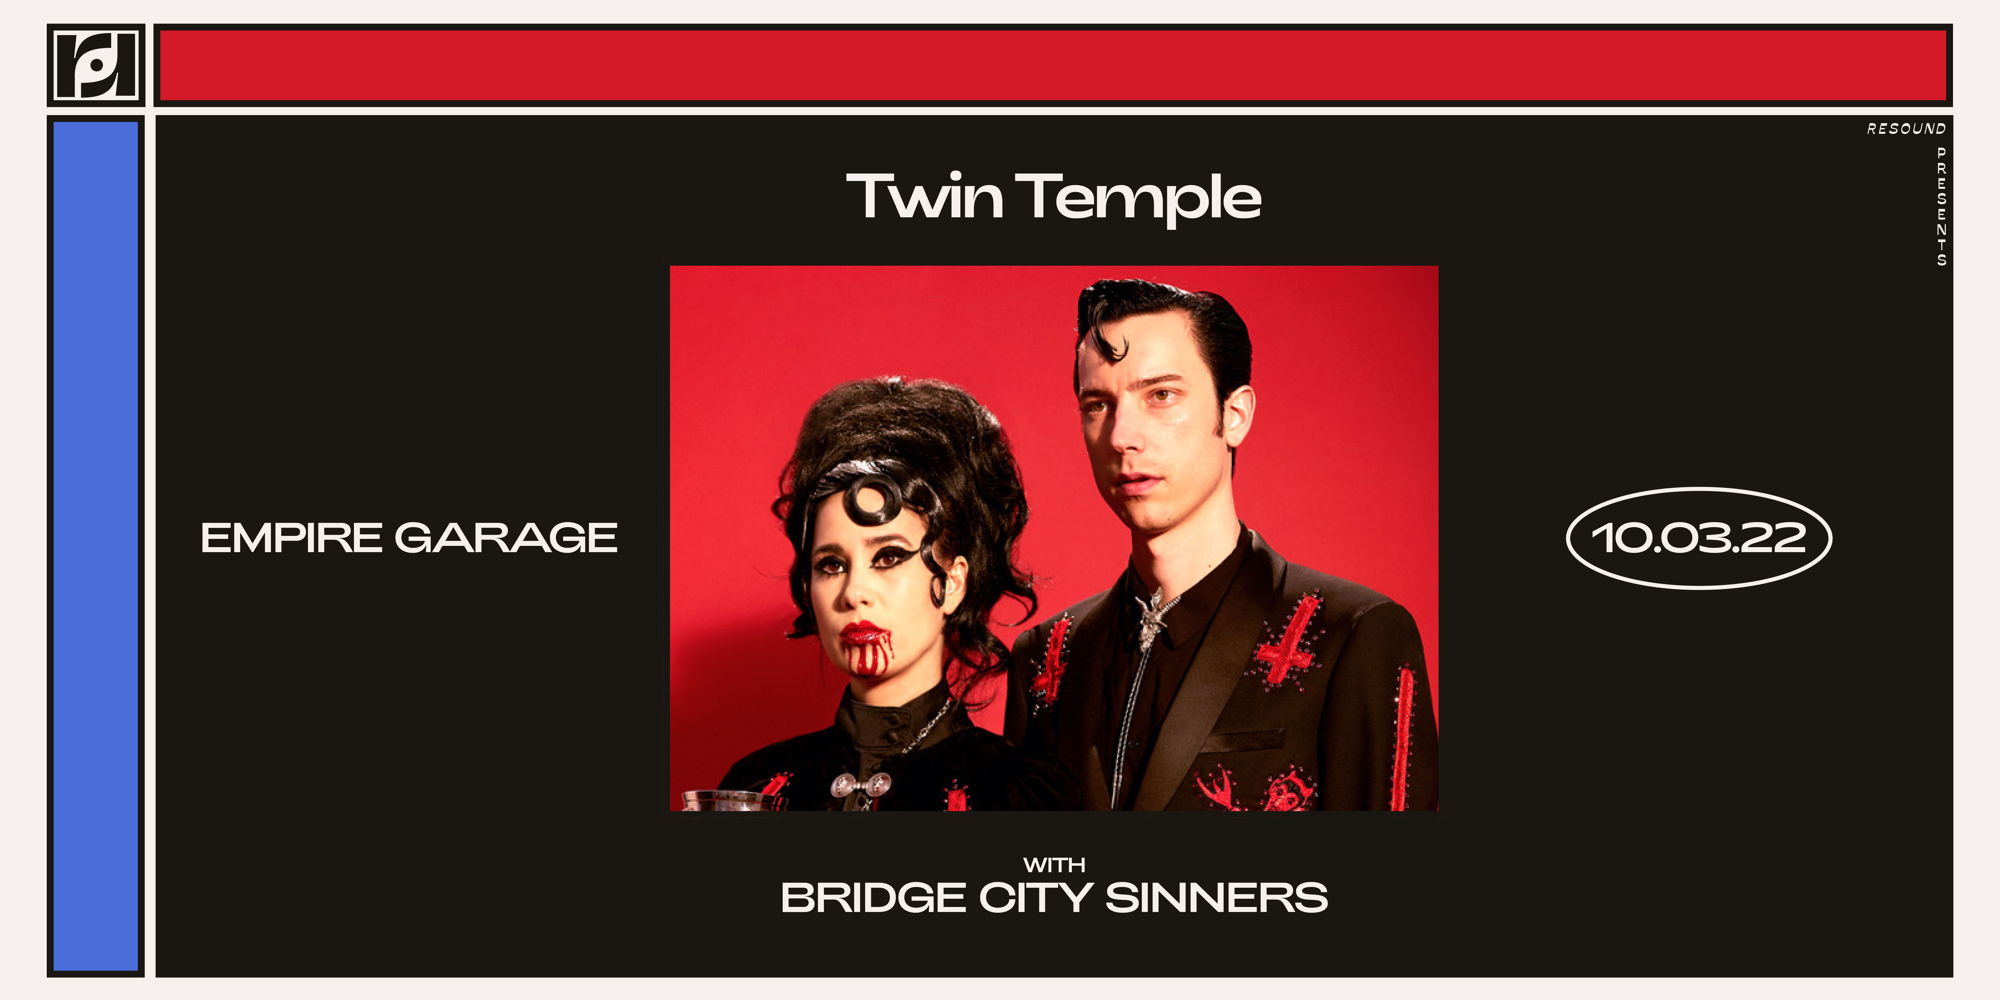  Twin Temple w/ Bridge City Sinners at Empire - 10/3 promotional image